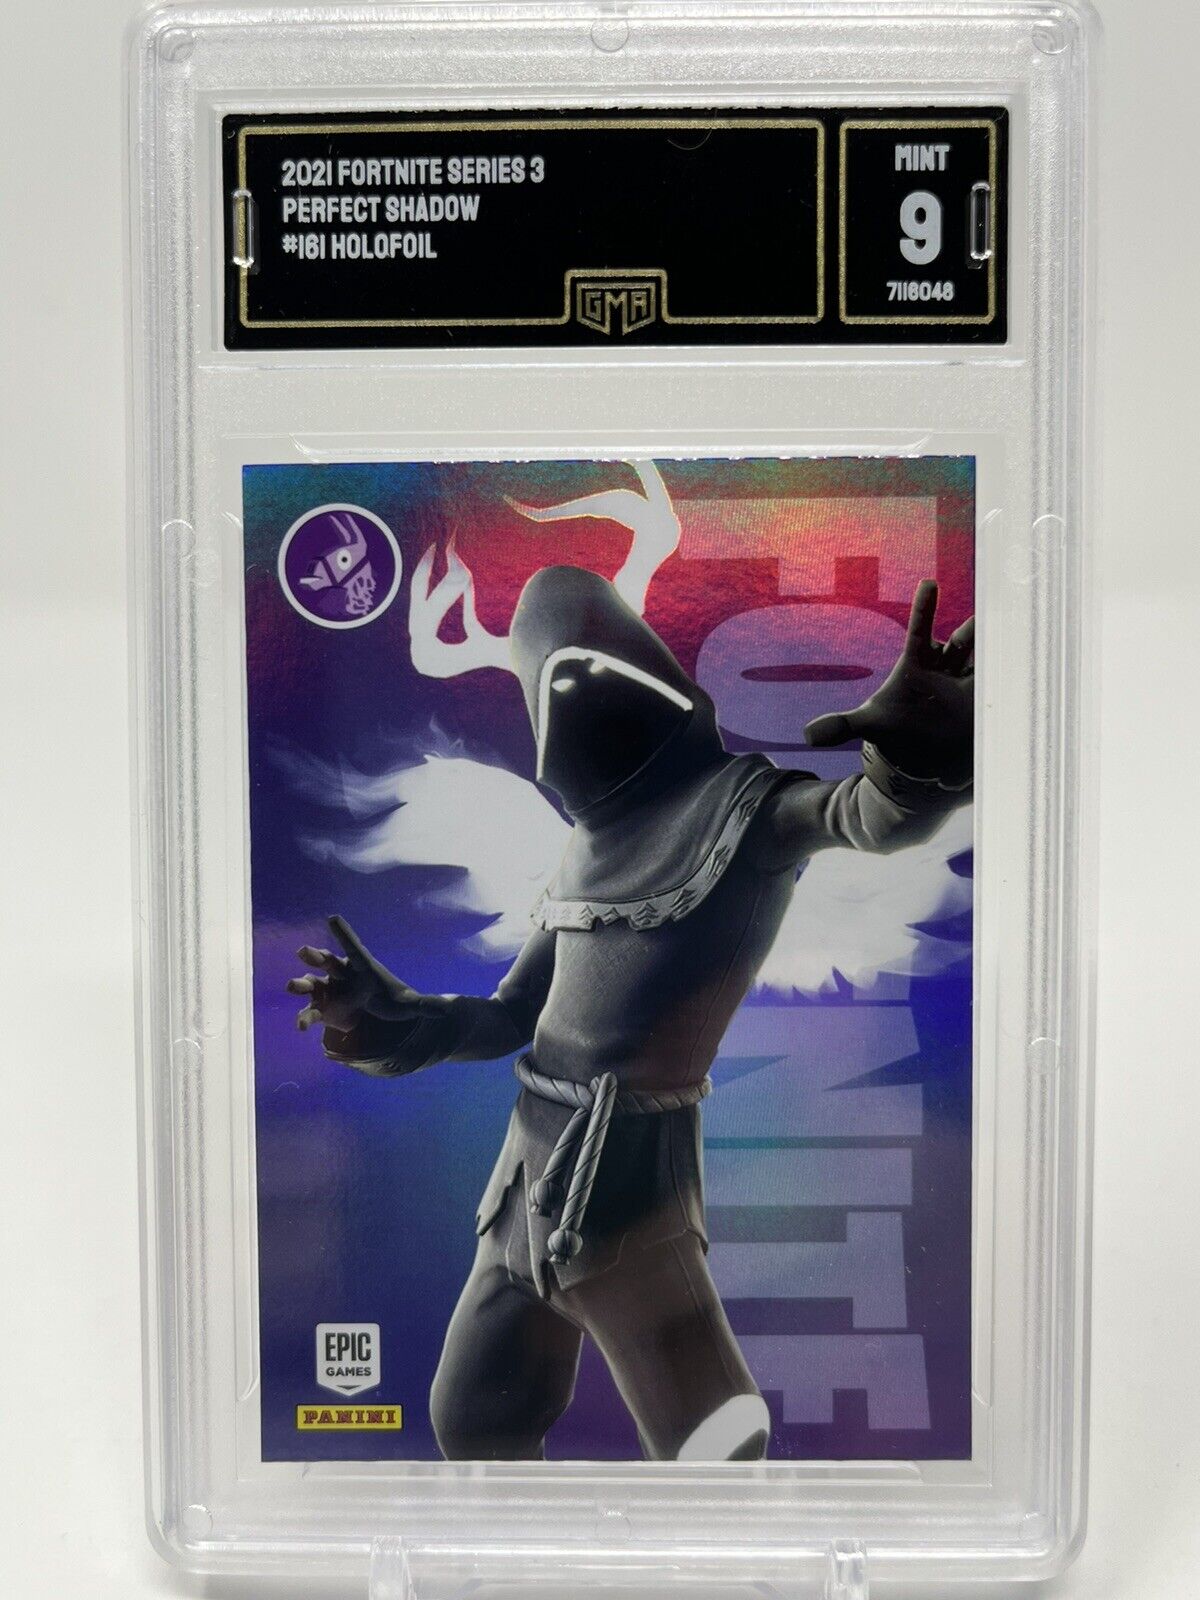 2021 Panini Fortnite Series 3 Perfect Shadow Cracked Ice Epic Outfit #161 GMA 9